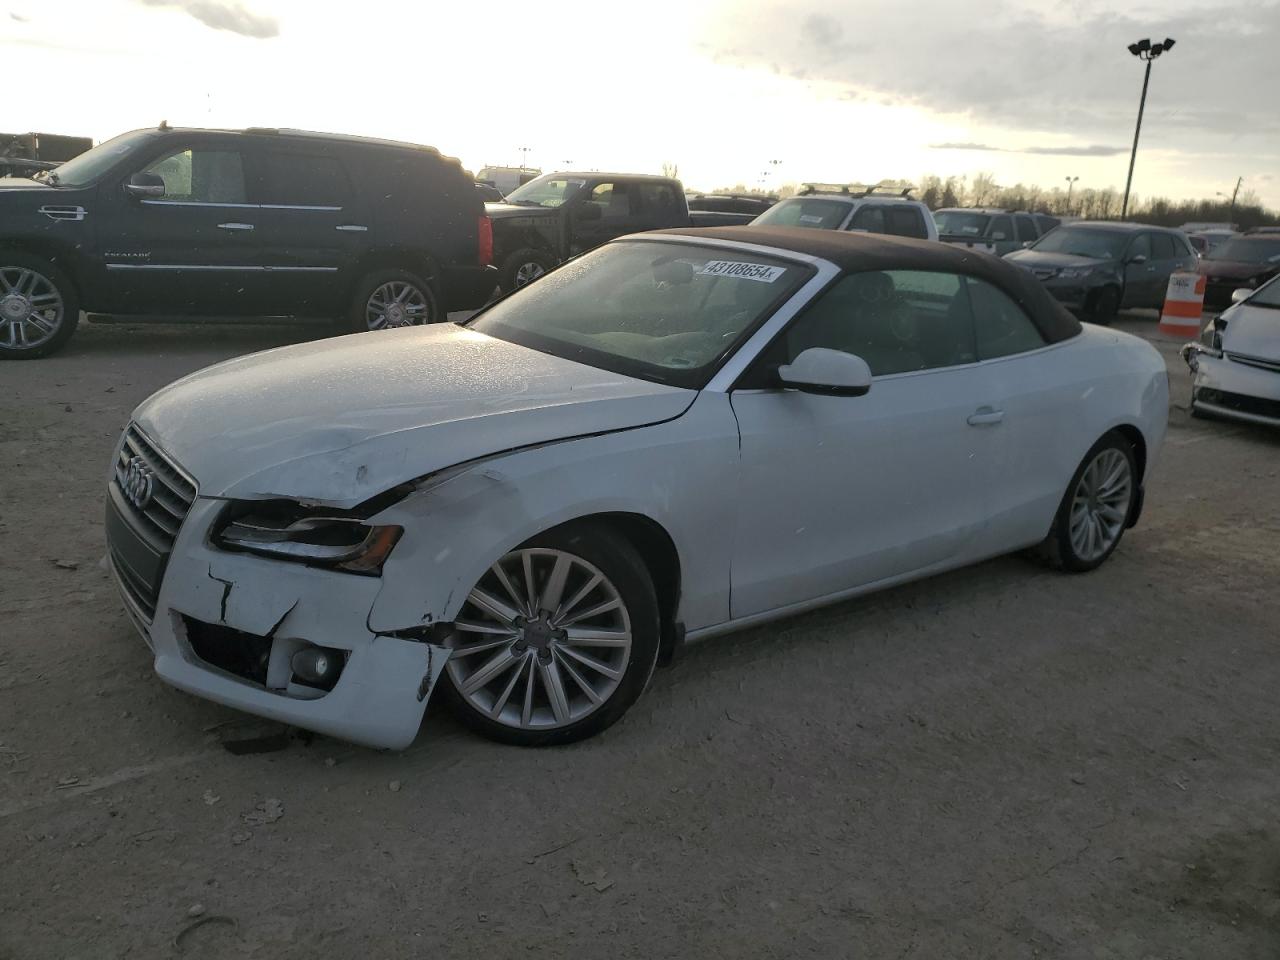 vin: WAUJFAFH9CN005983 WAUJFAFH9CN005983 2012 audi a5 2000 for Sale in 46254 2452, In - Indianapolis, Indianapolis, Indiana, USA